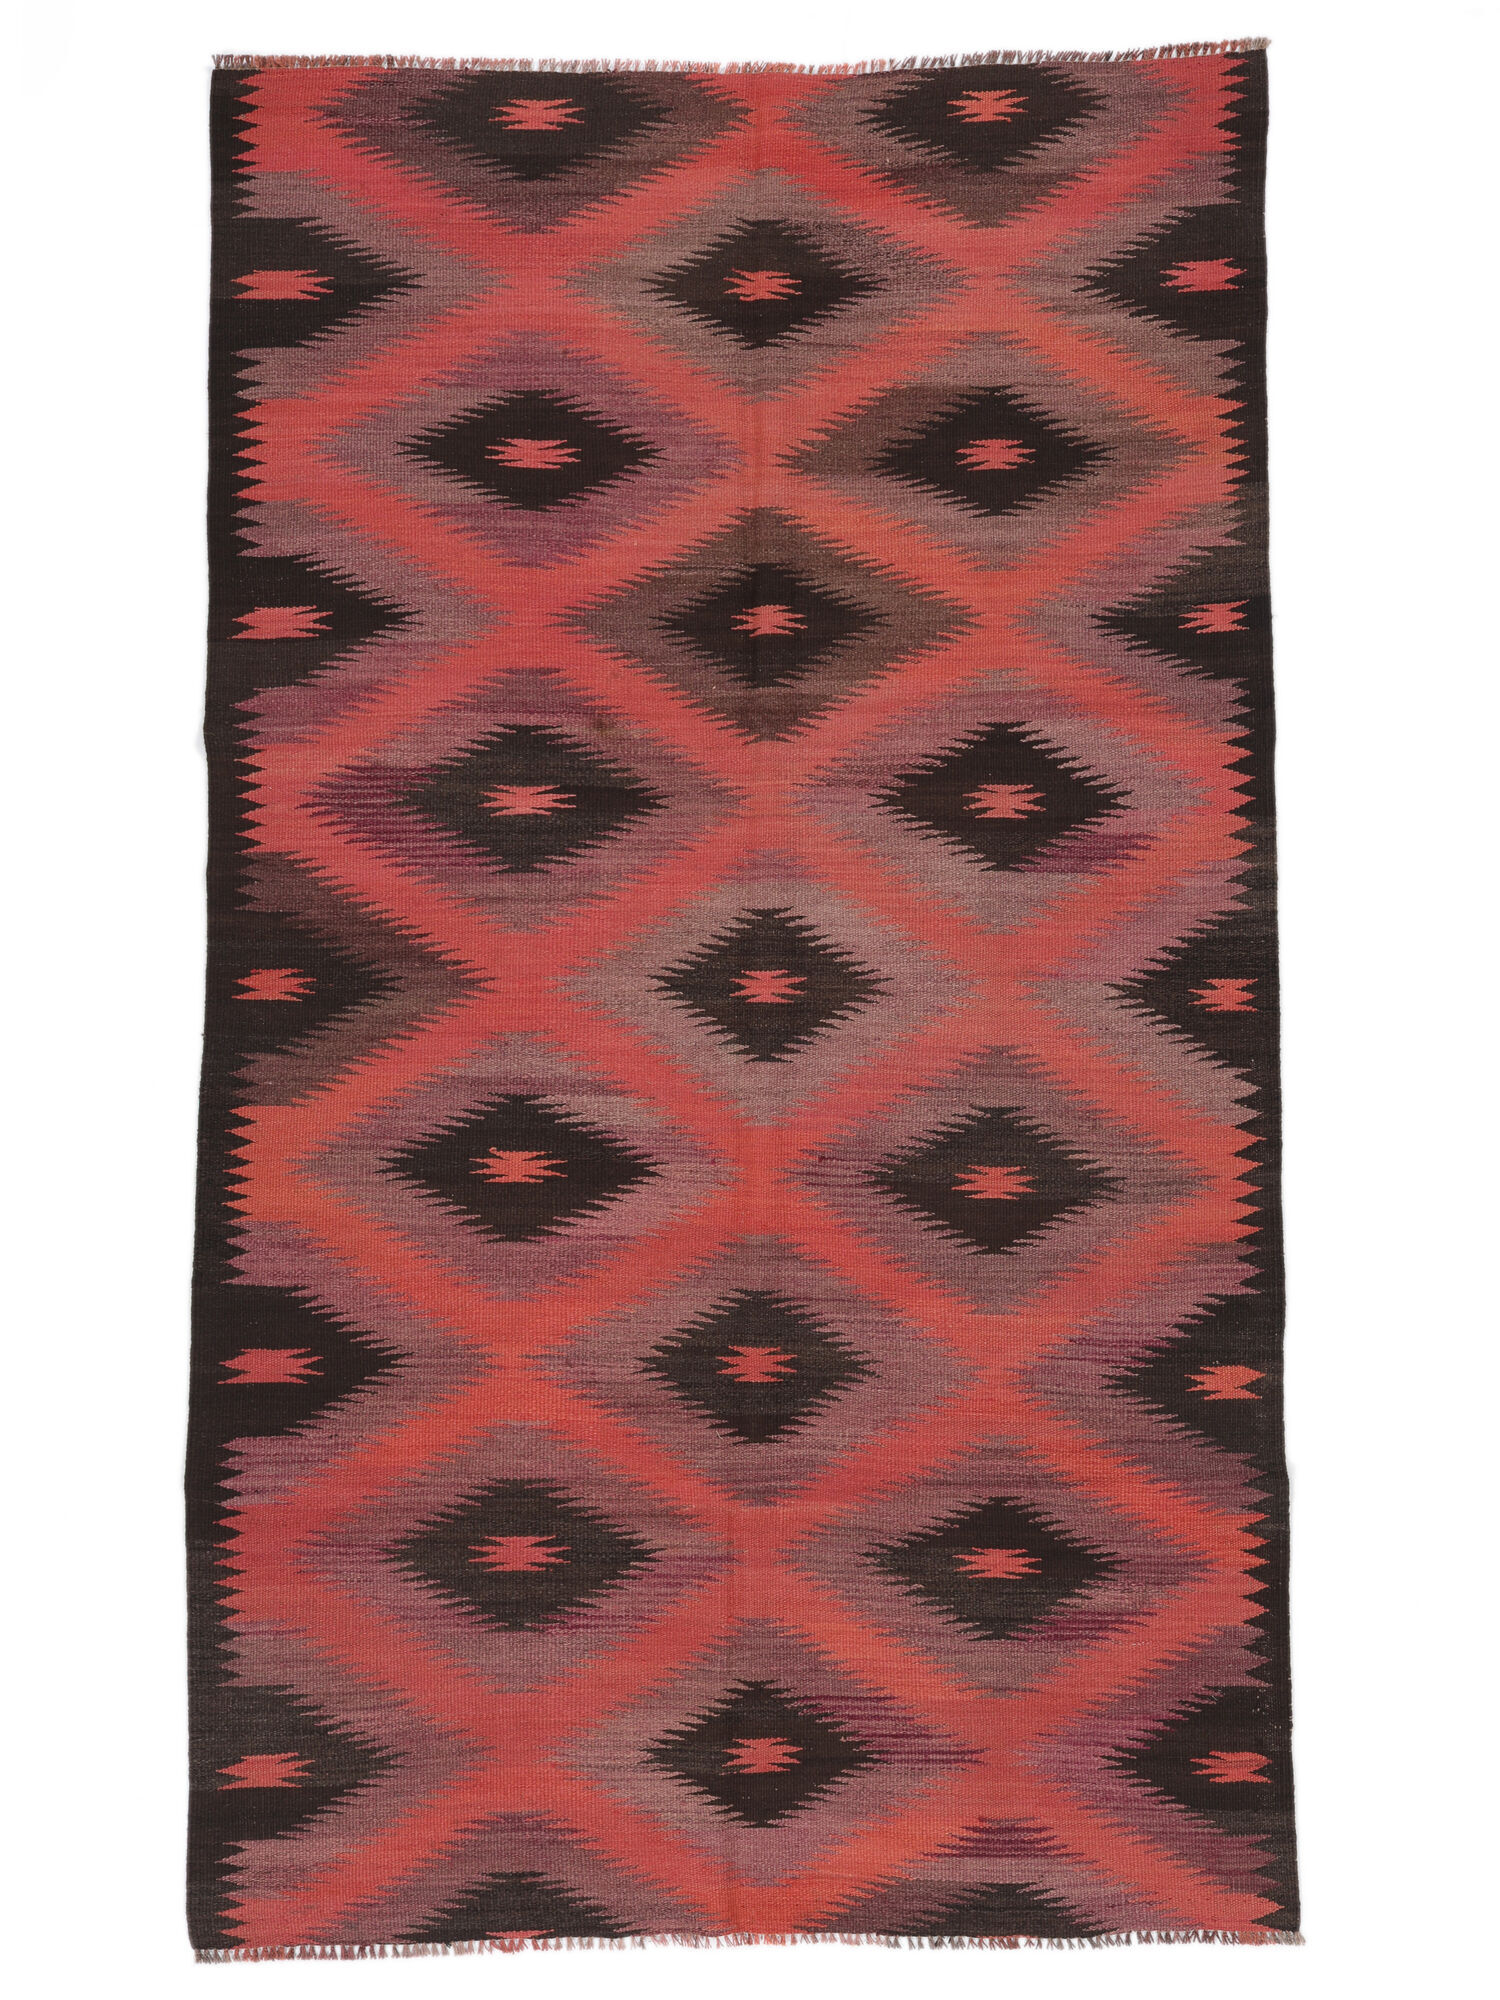 Annodato a mano. Provenienza: Afghanistan Afghan Vintage Kilim Tappeto 150x267